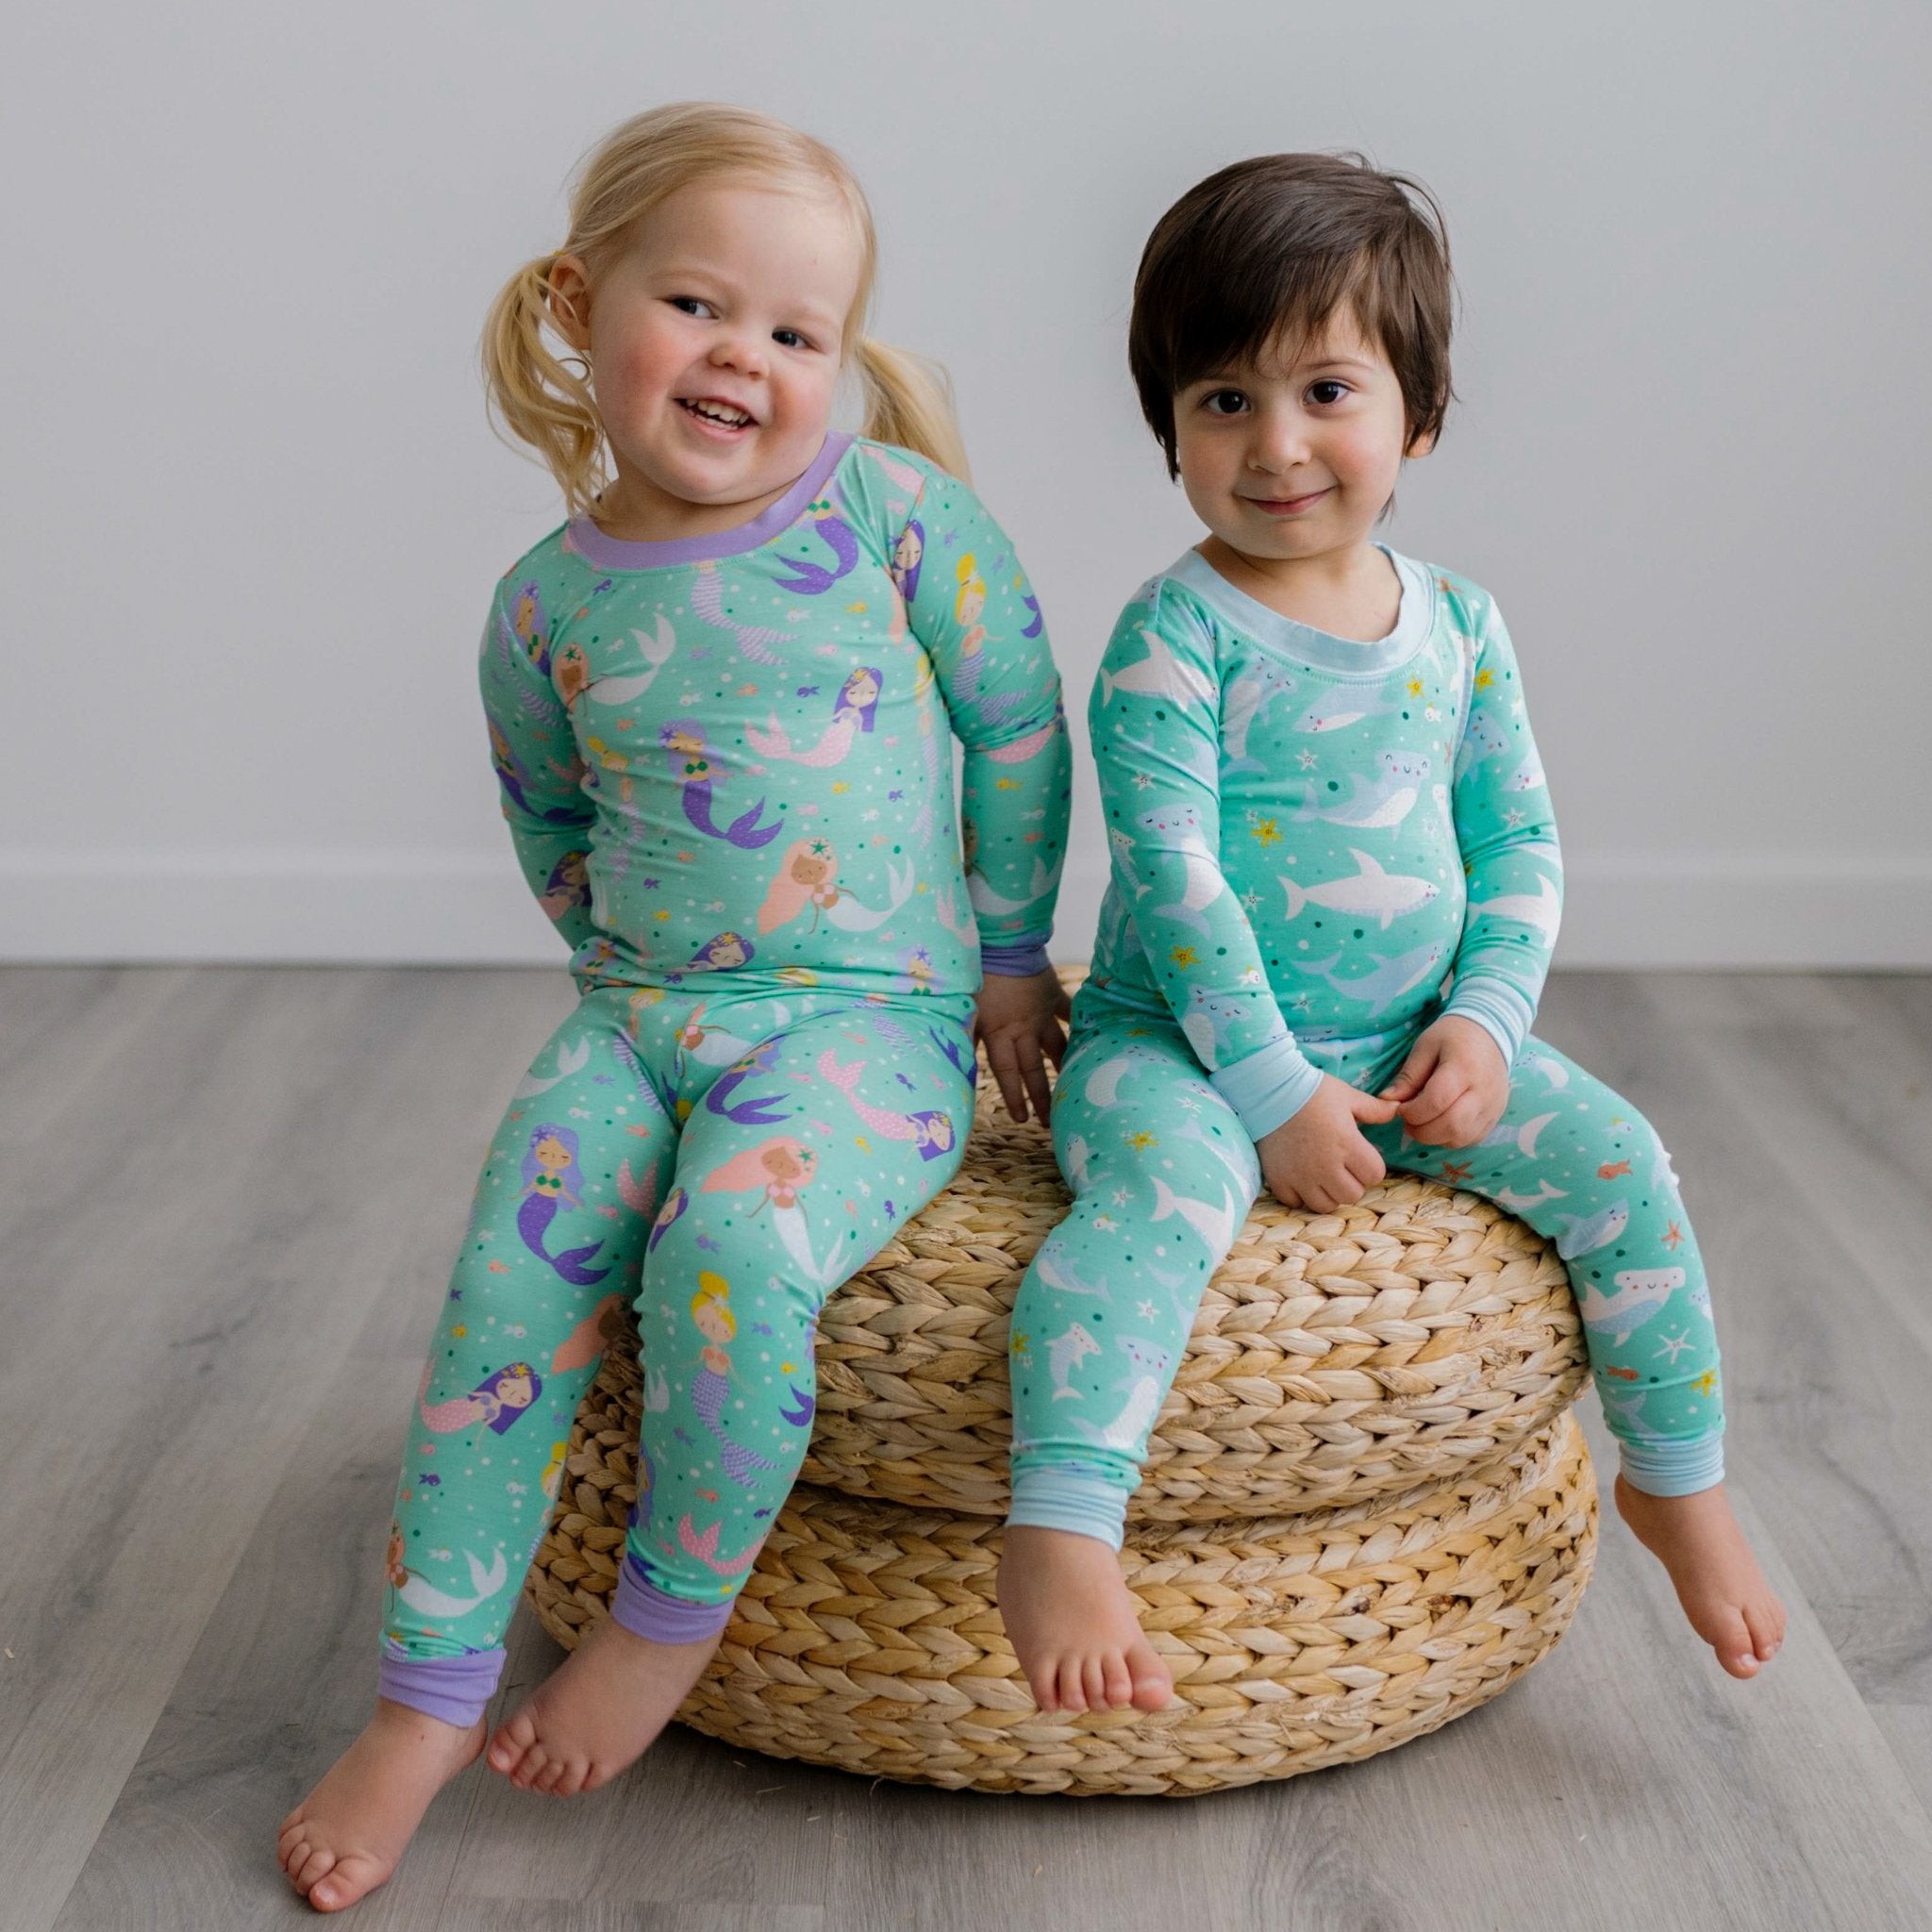 Two-piece matching pajama set in cute designs. Made from beautifully soft  bamboo.